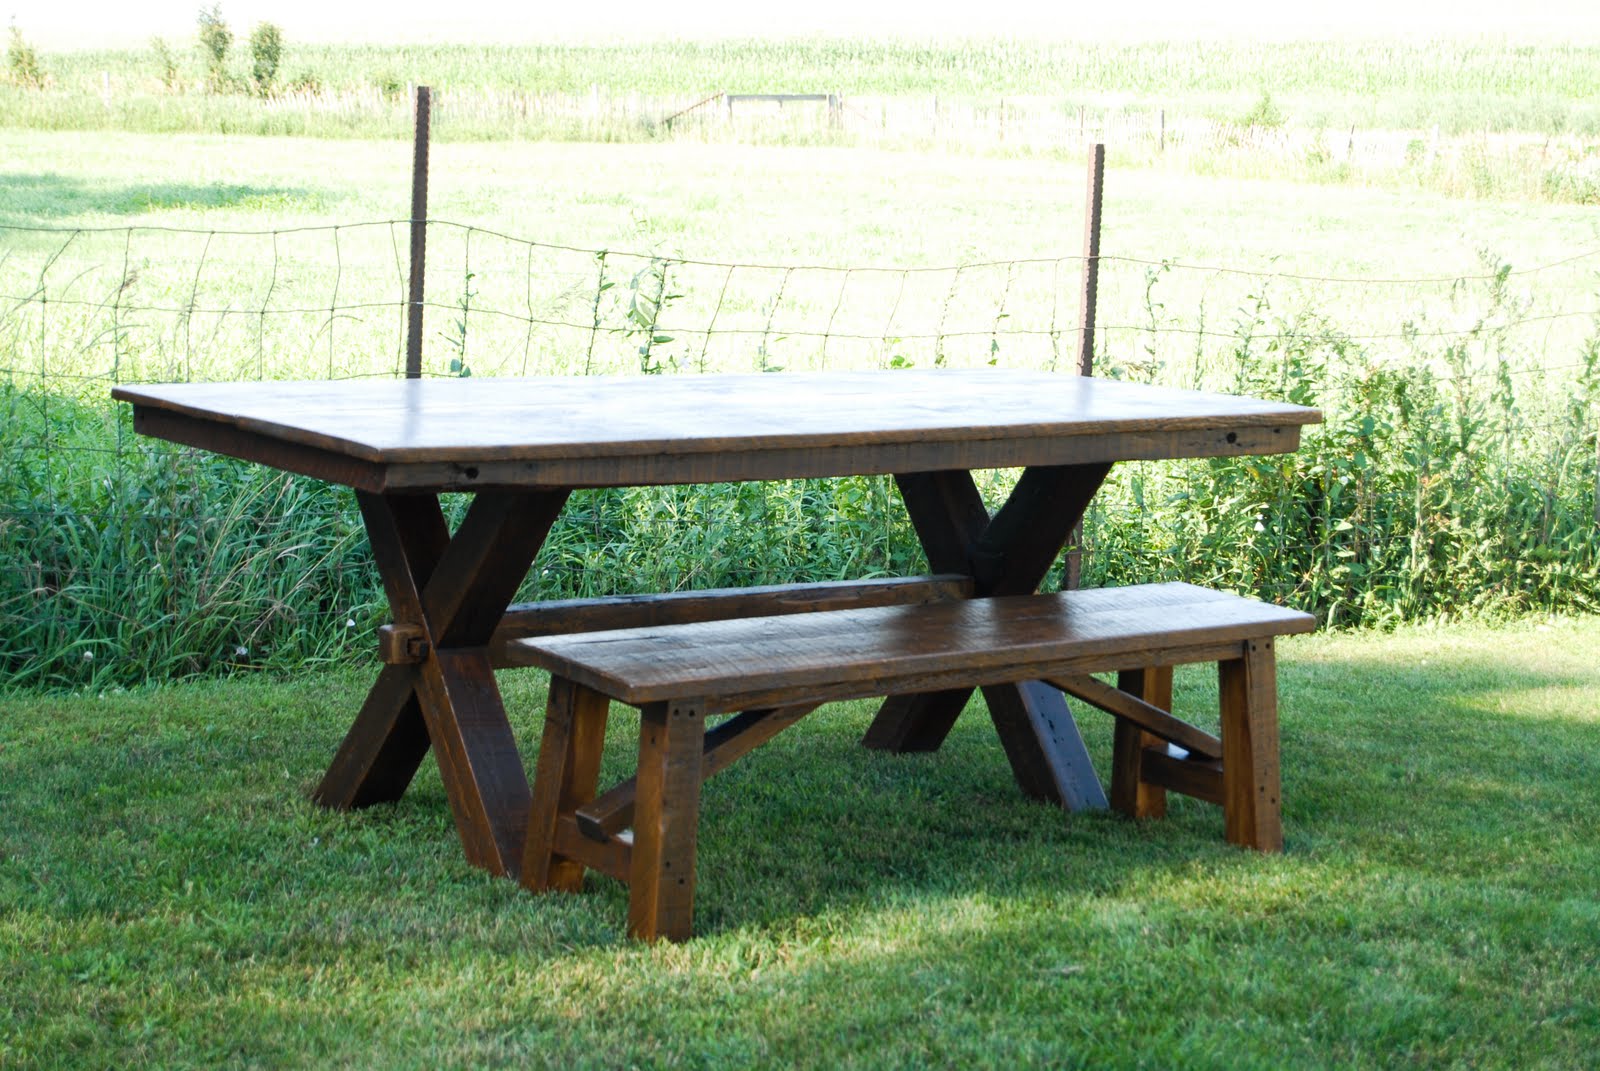 LG Custom Woodworking: Trestle-Picnic Style Dining Table and Bench